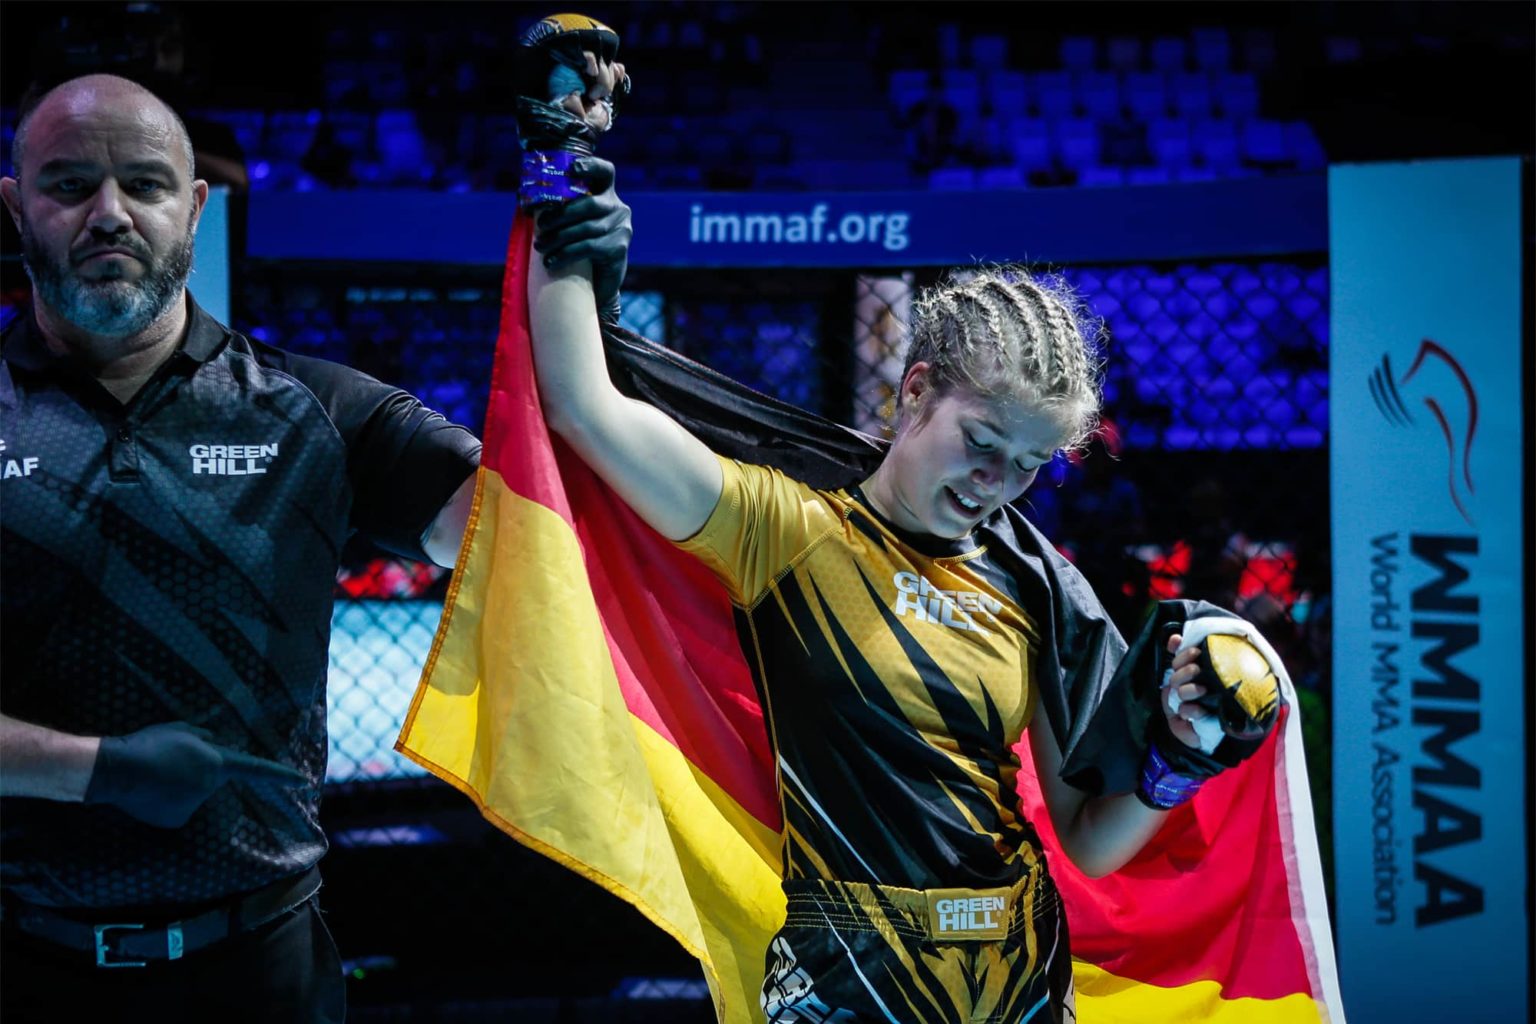 Team Sweden Athletes Travel To Wales For Immaf Euros Warm Up This